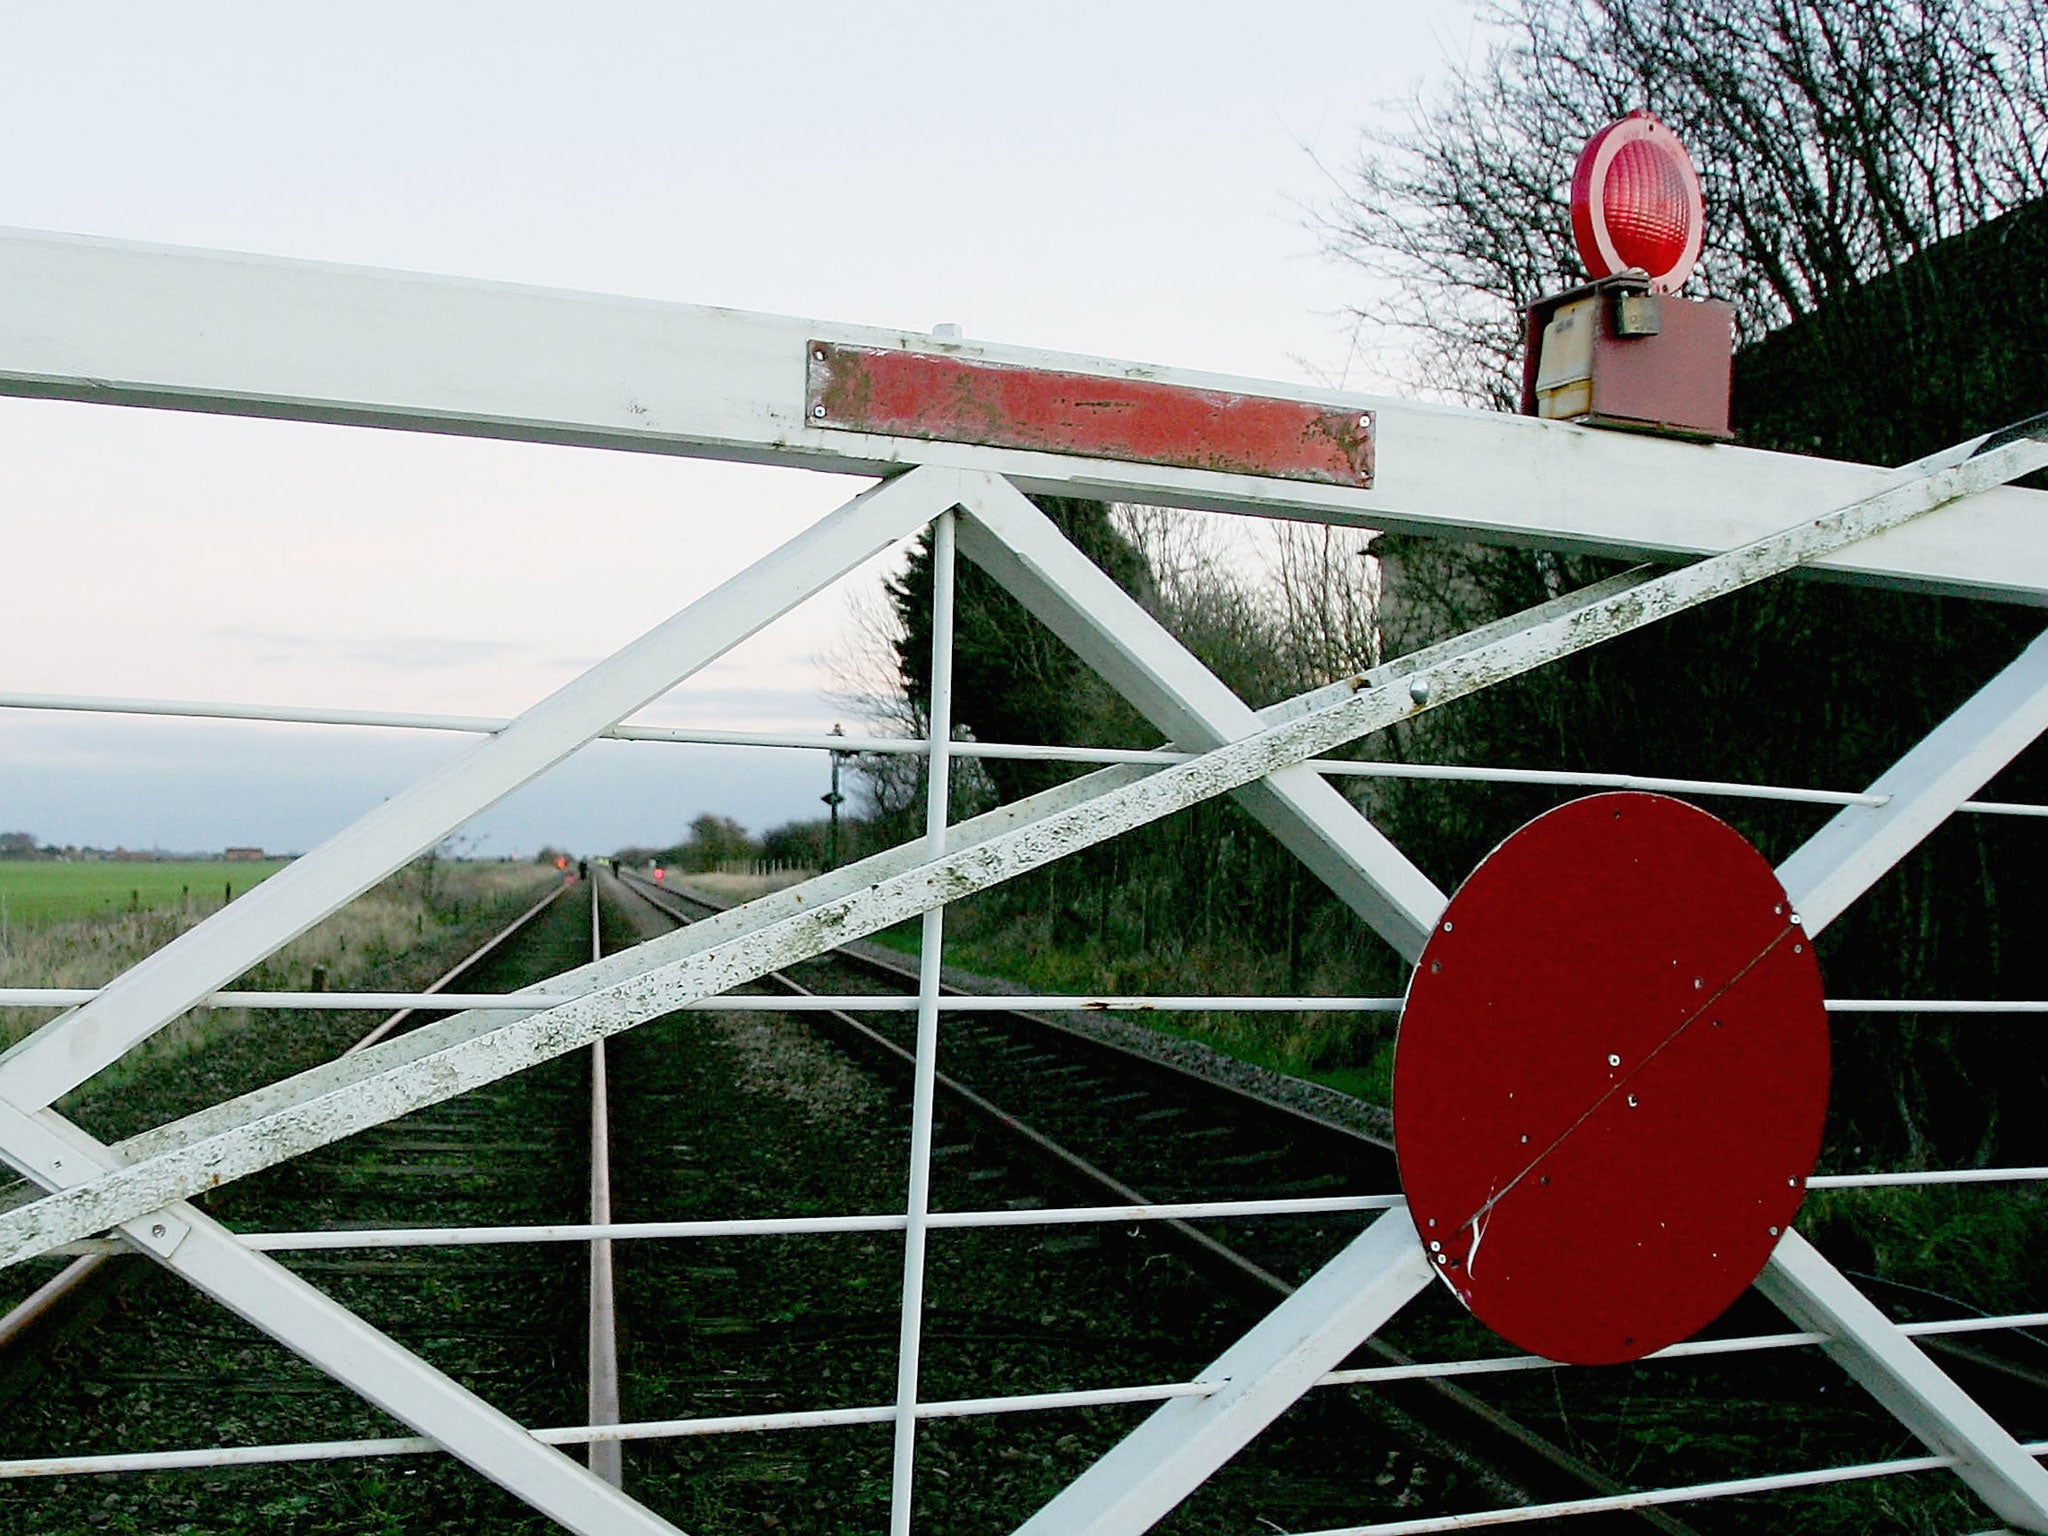 Network Rail said it had closed almost 800 level crossings since 2010